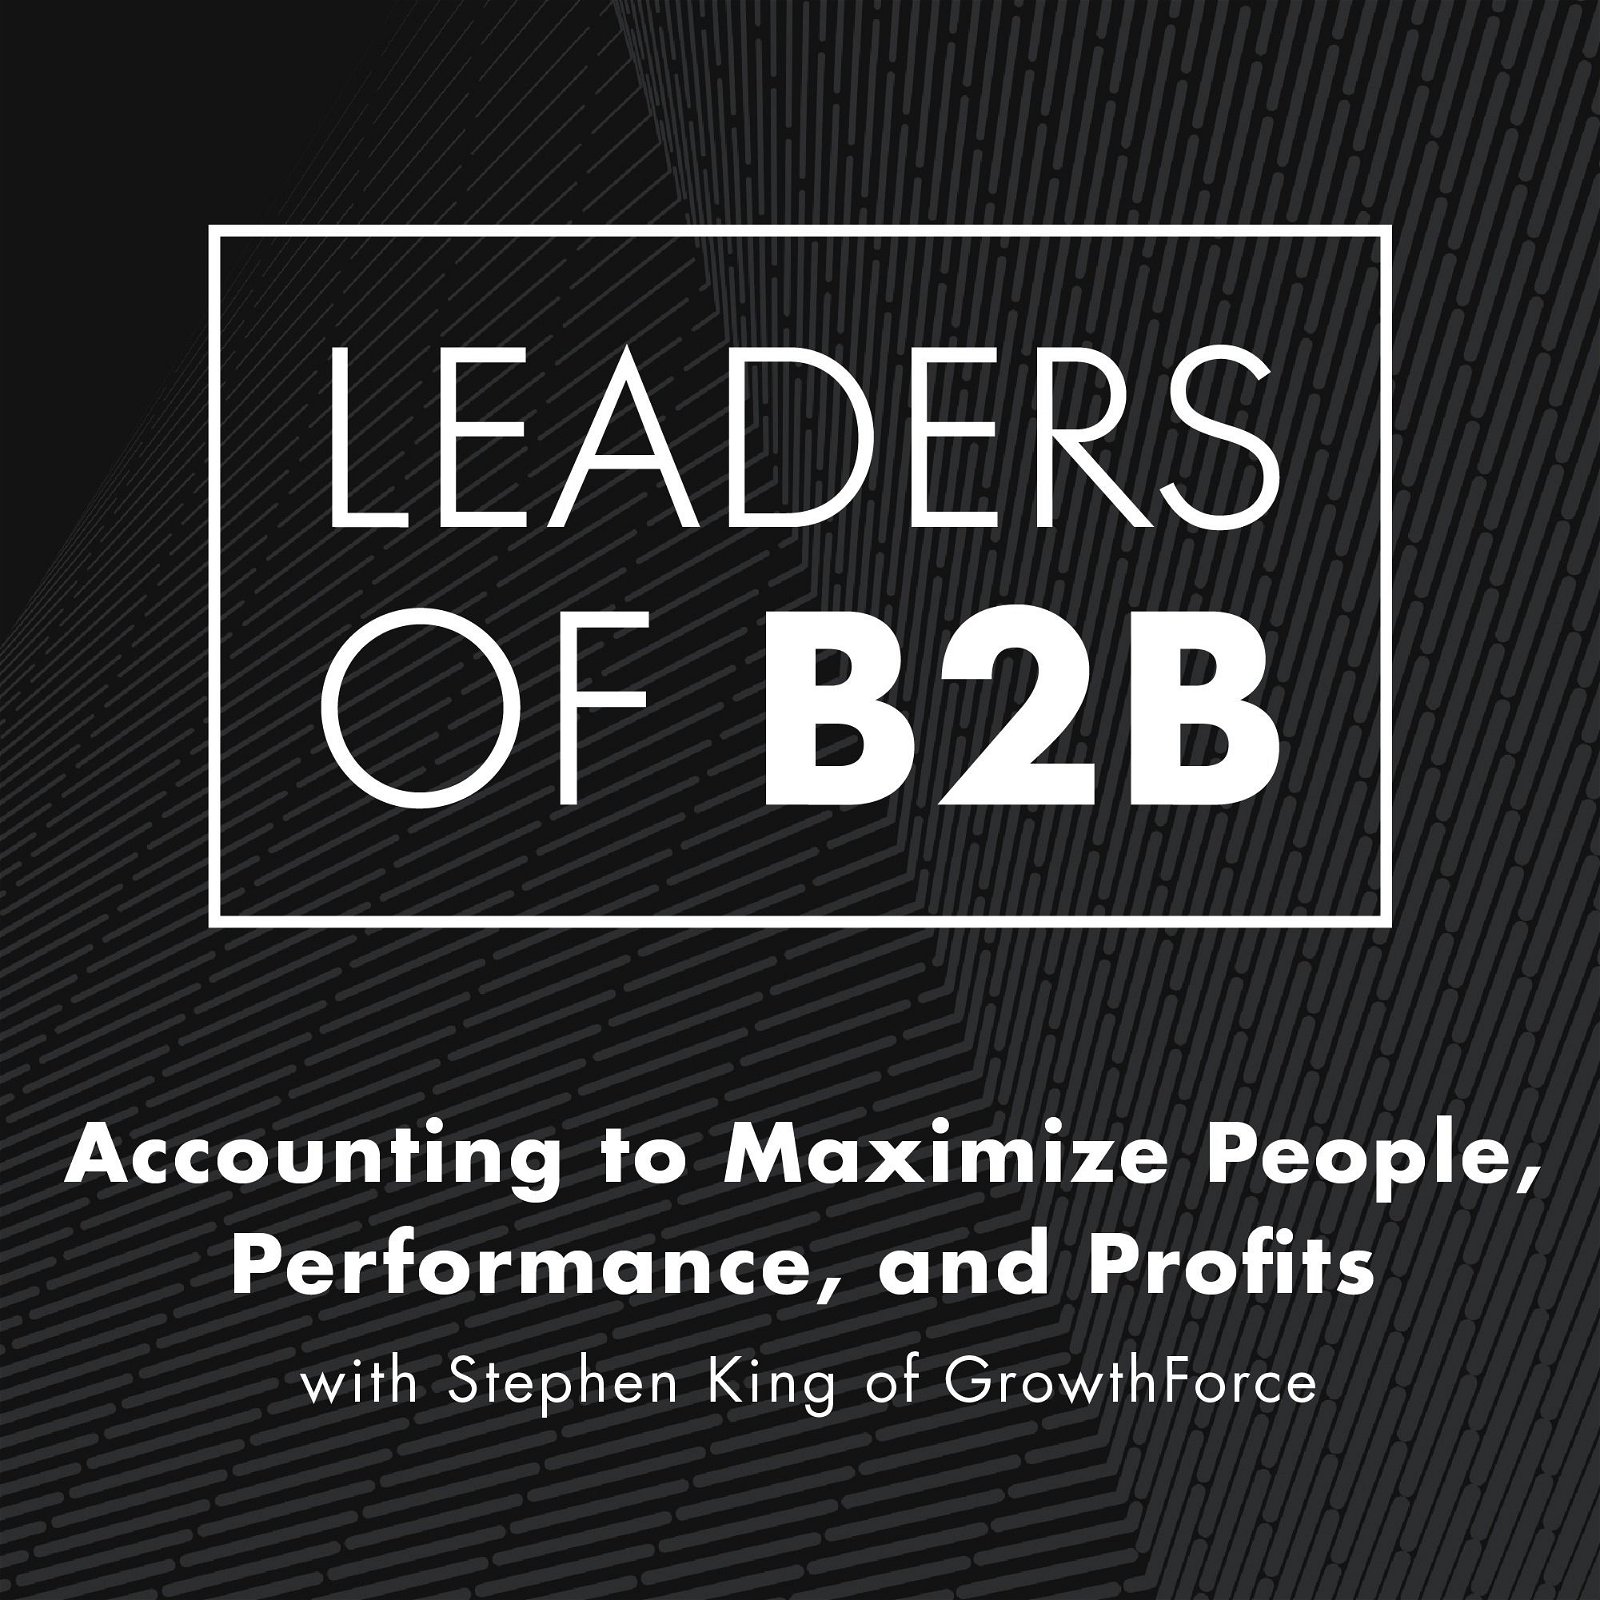 Accounting to Maximize People, Performance, and Profits with Stephen King of GrowthForce